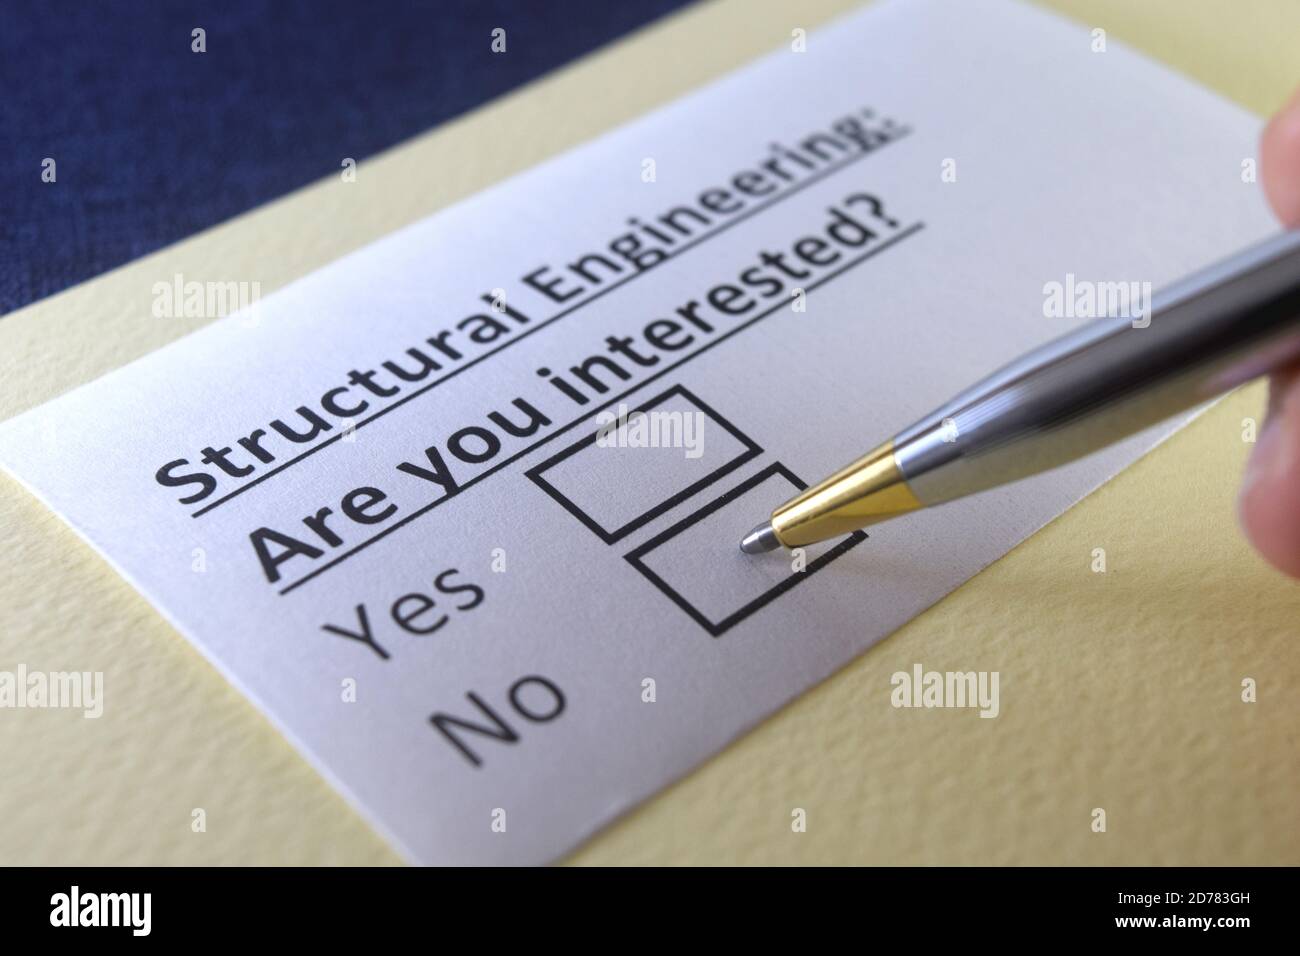 One person is answering question about structural engineering. Stock Photo